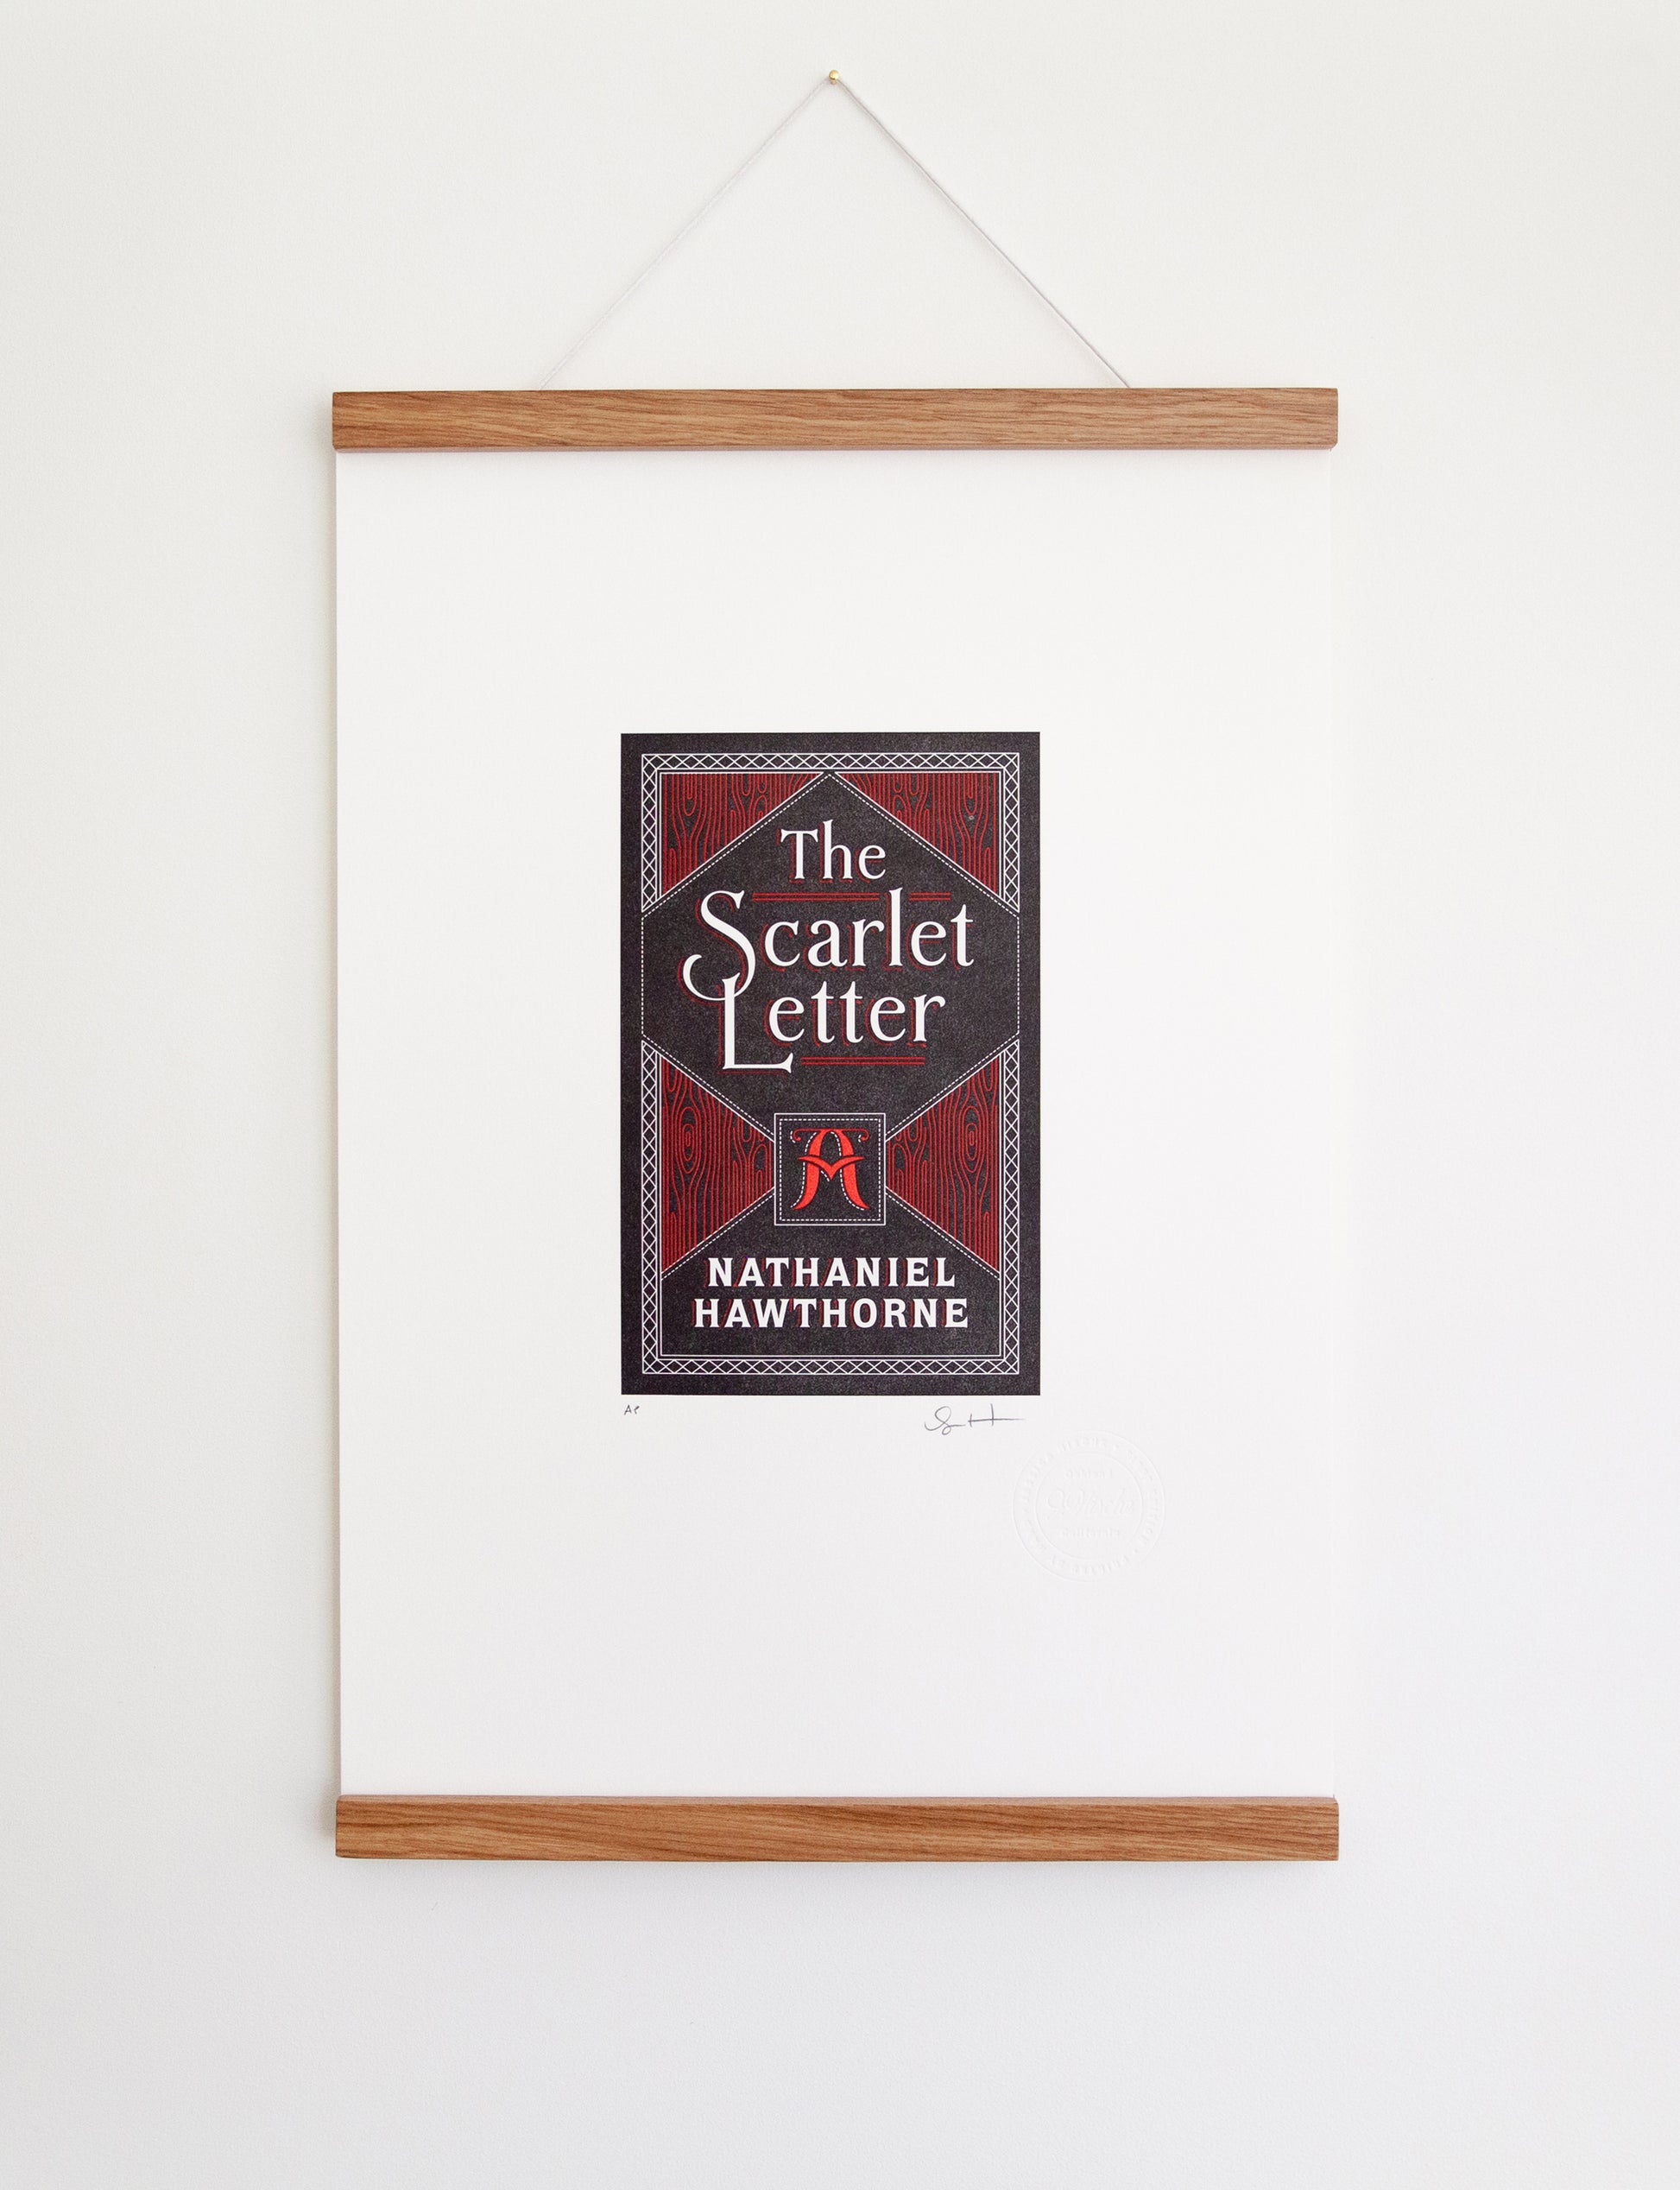 Framed 2-color letterpress print in black and red. Printed artwork is an illustrated book cover of The Scarlet Letter including custom hand lettering.